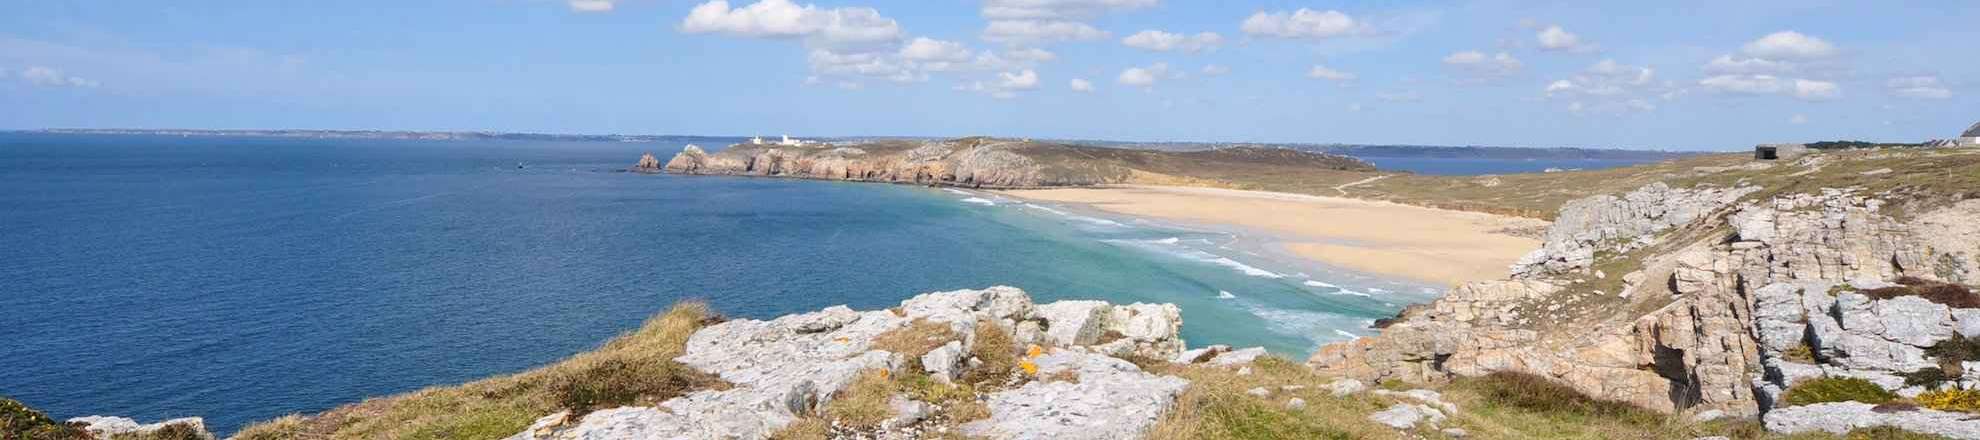 Vacation Brittany in Finistère, the sandy beach Pen Hat of Camaret-sur-mer is one of the most beautiful beaches of Brittany